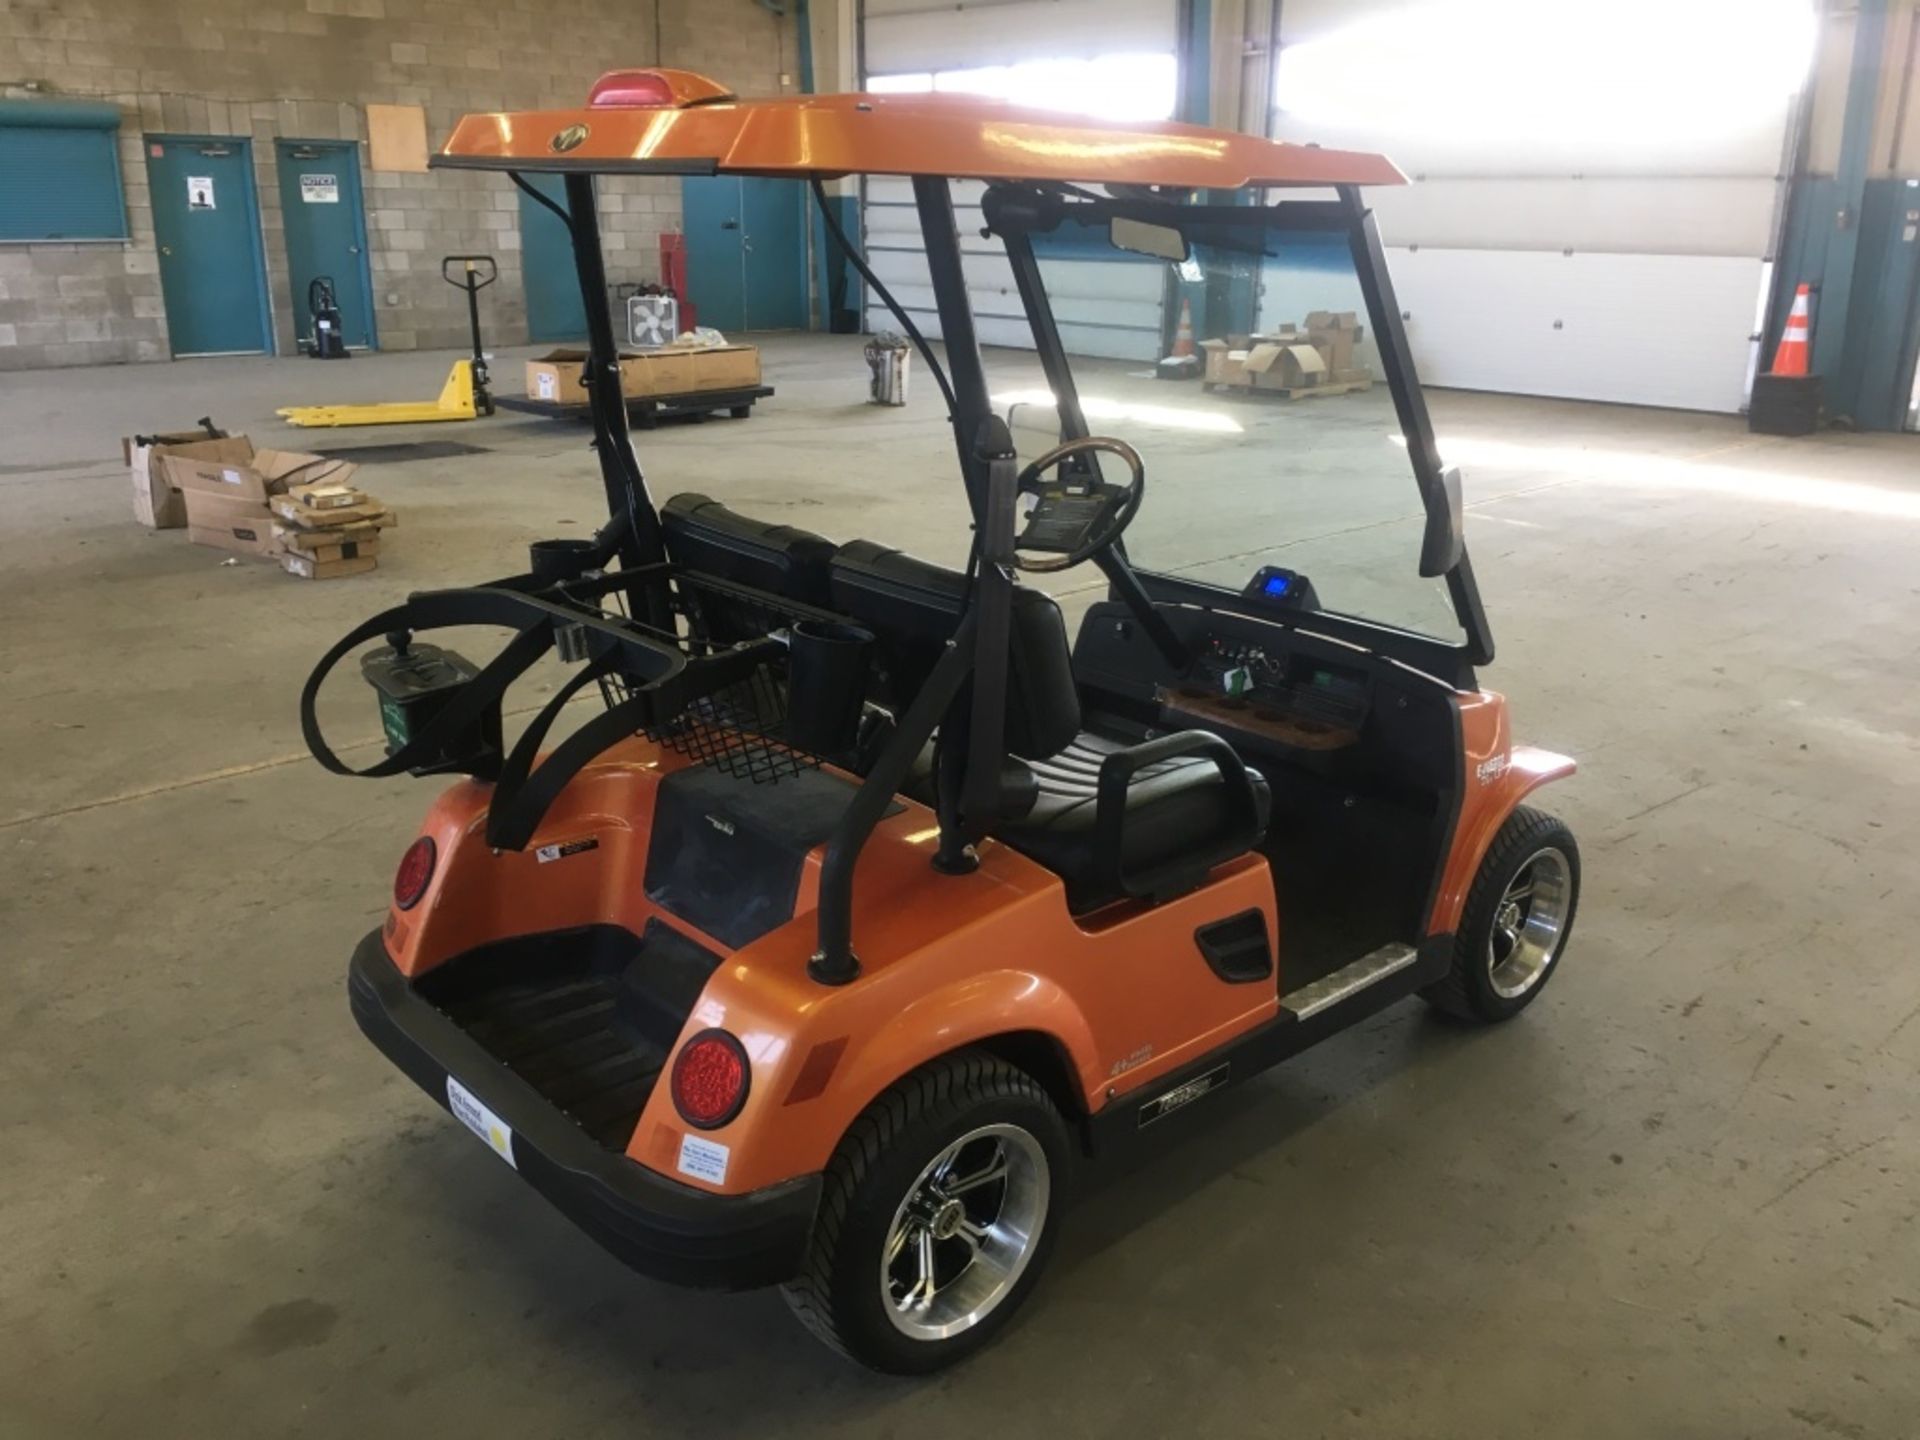 2009 Tomberlin Emerge 500 LE Golf Cart - Image 3 of 14